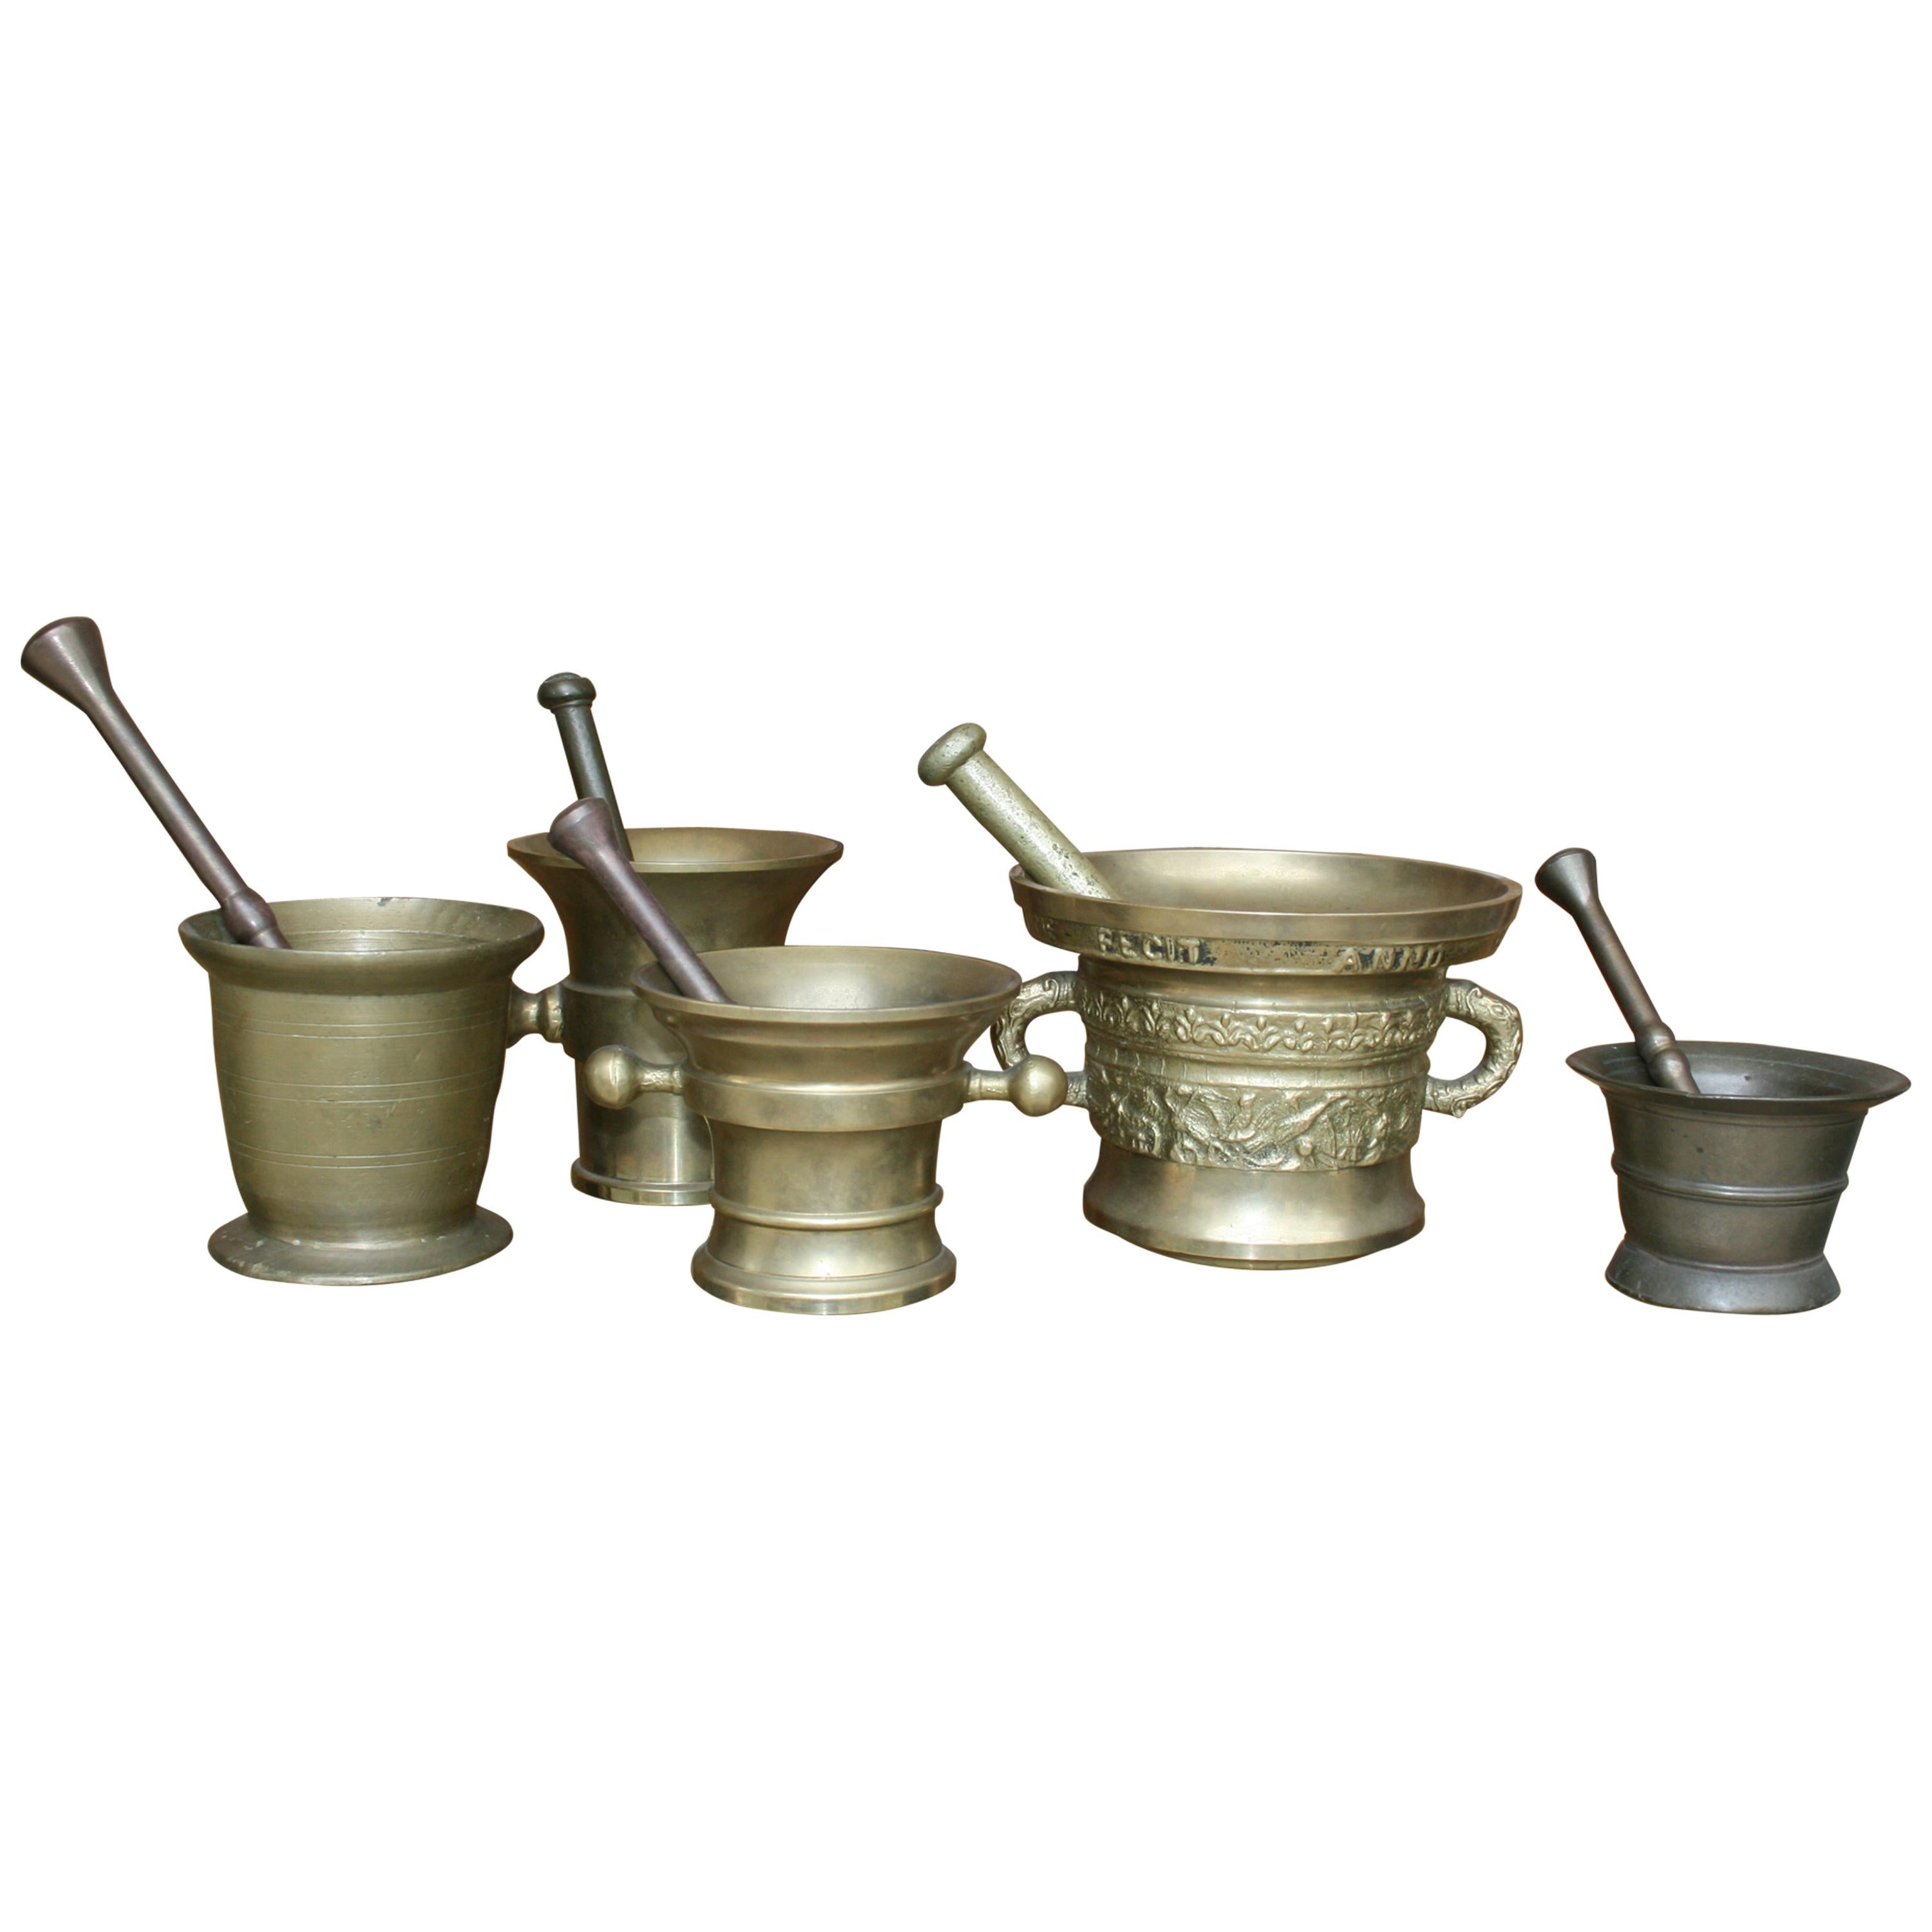 Germany Pharmacy Apothecary Mortar with Pestles, Set of 5